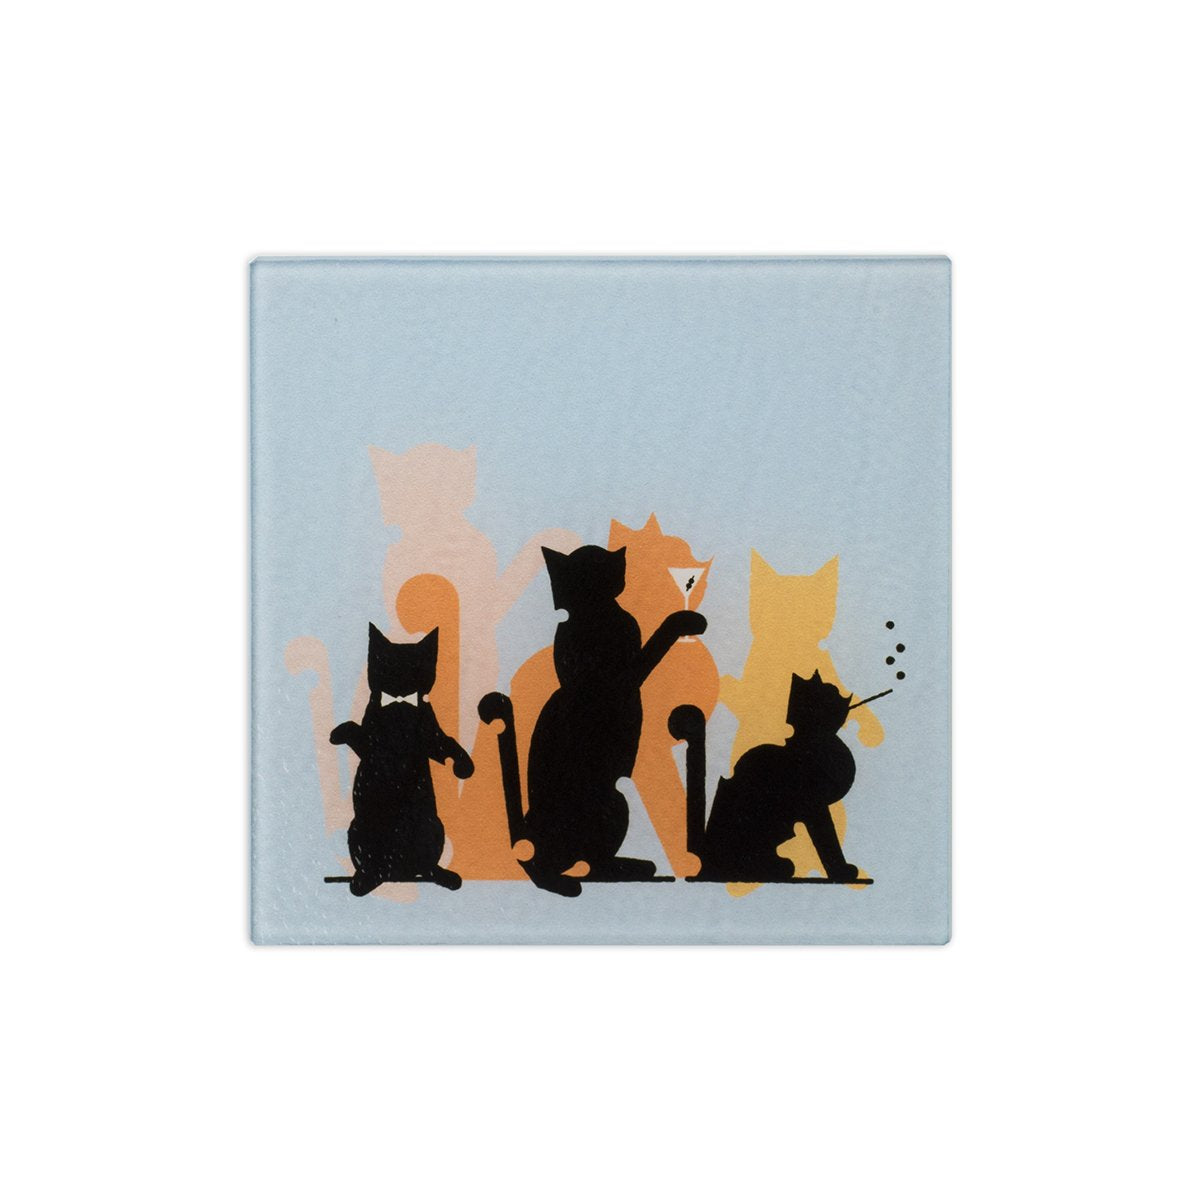 6" x 6" heat resistant tempered glass trivet featuring three silhouettes of cats in black and shades of orange